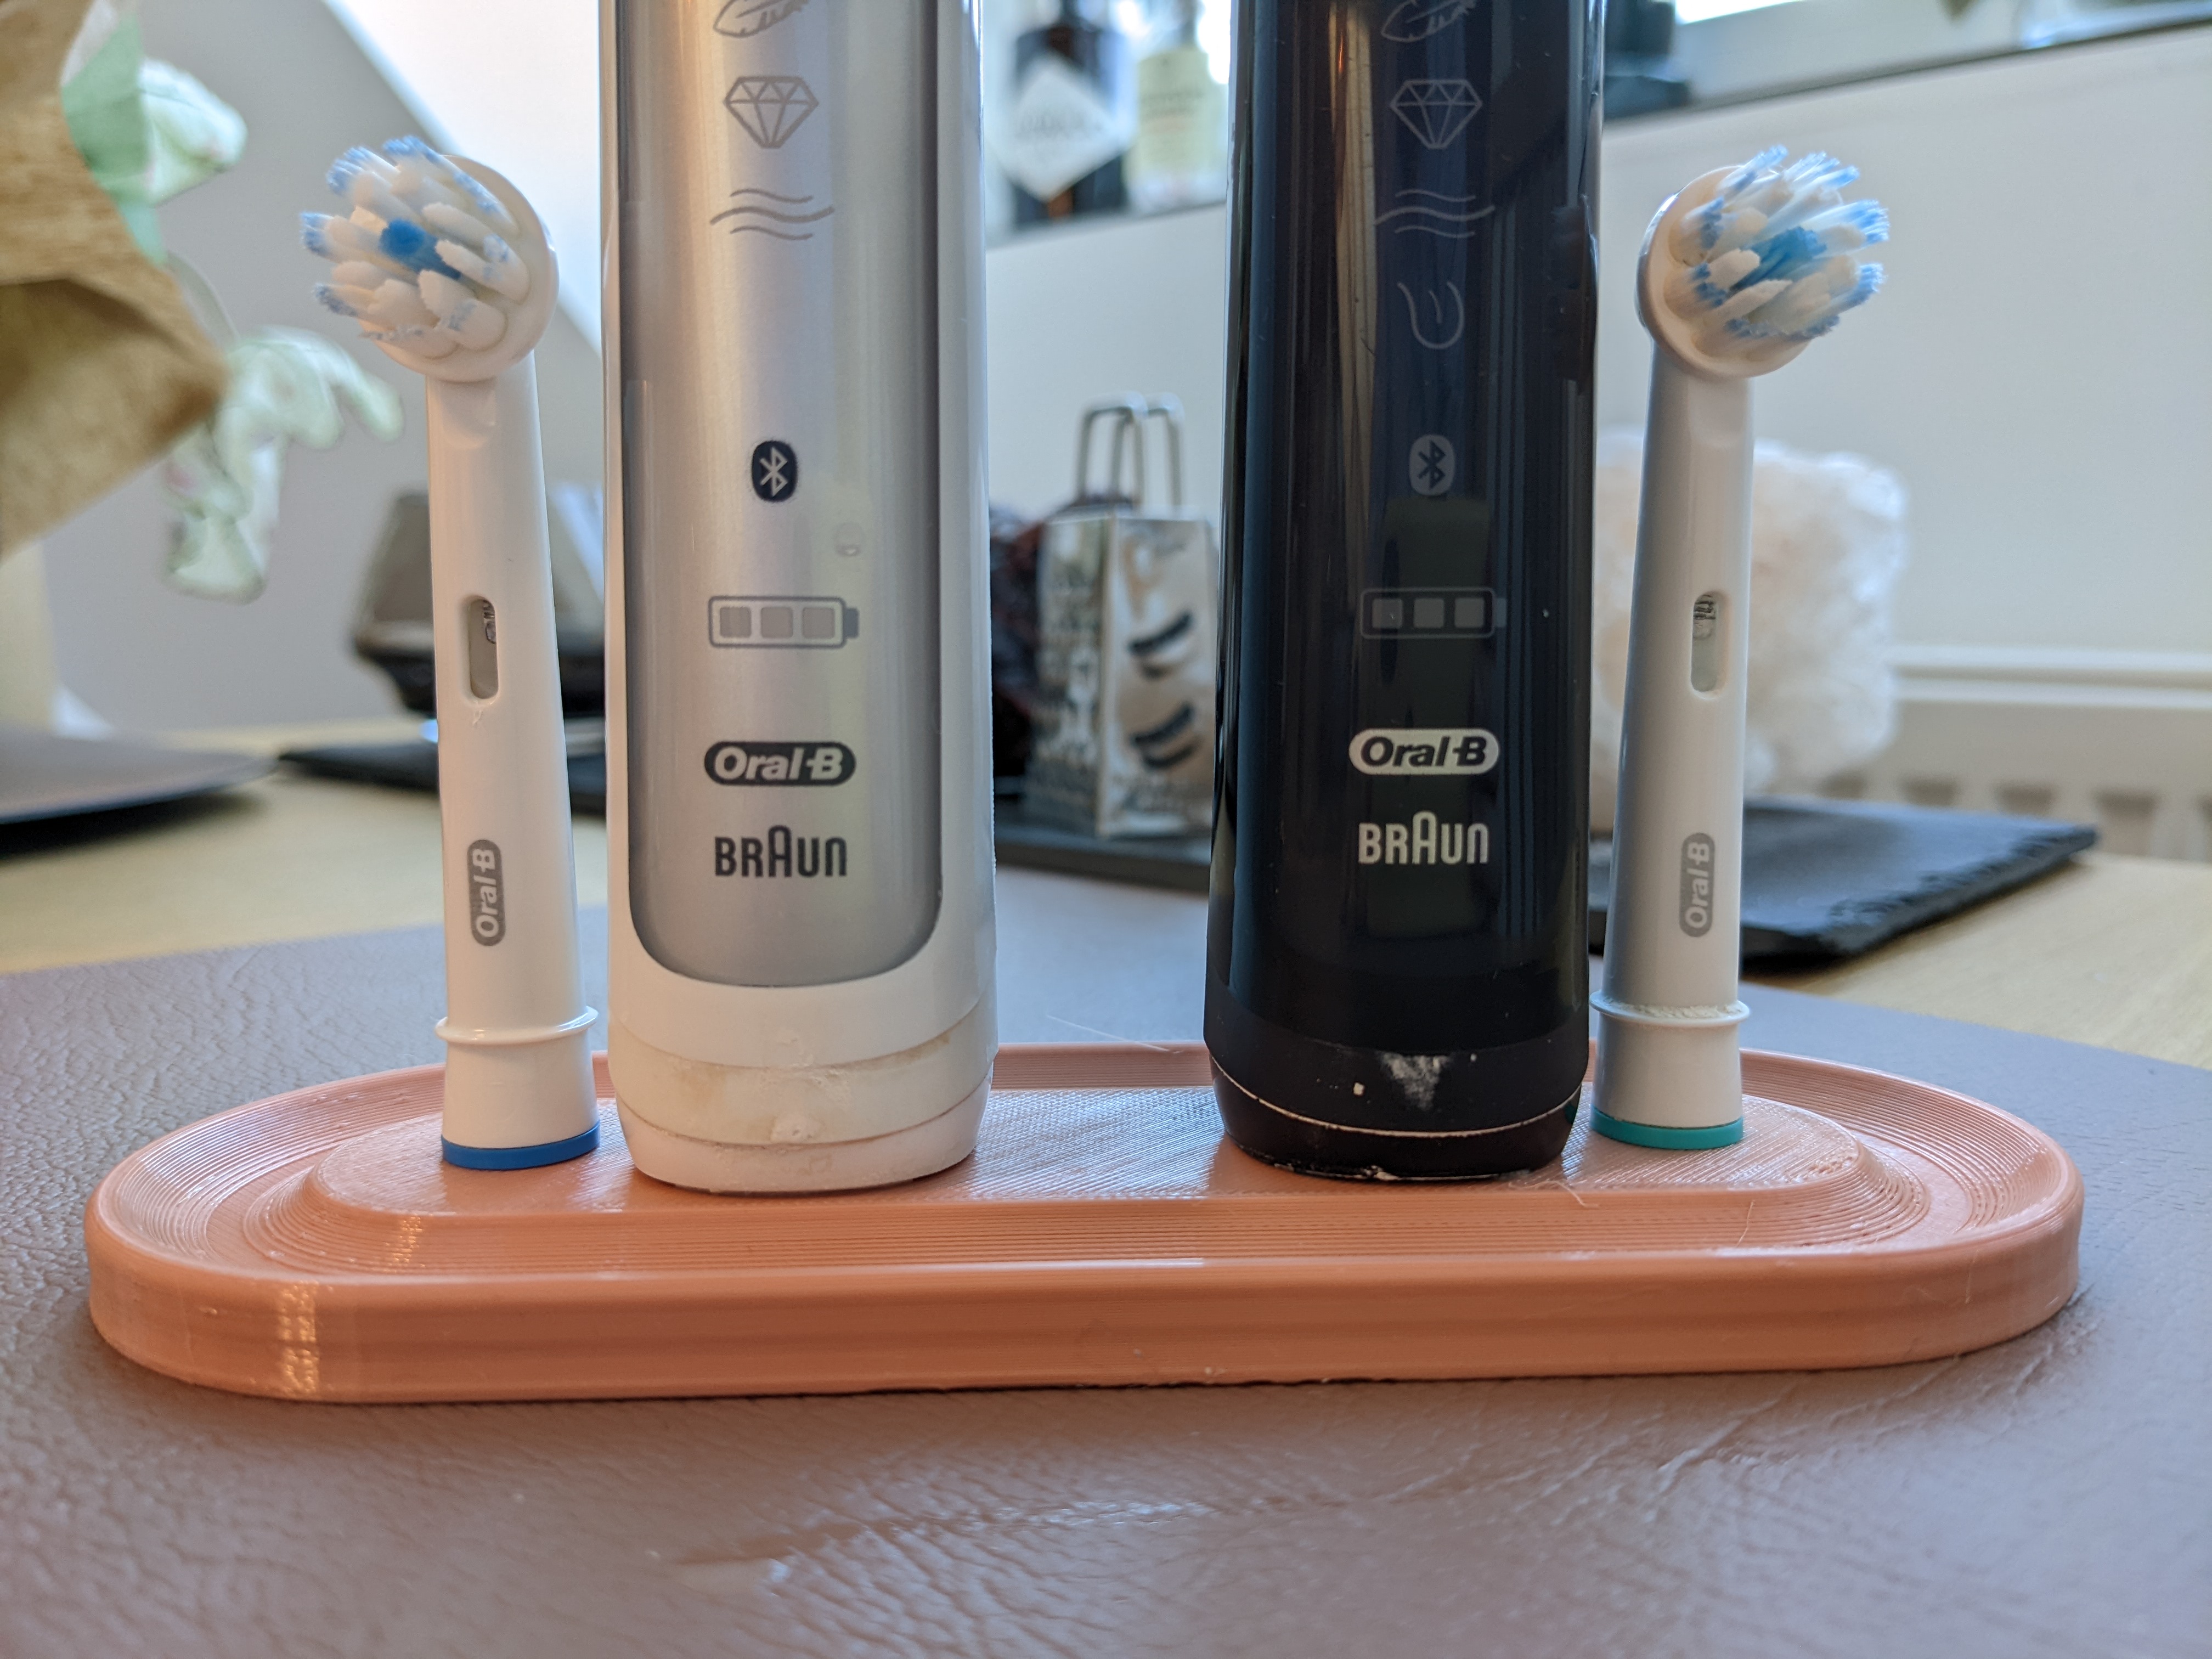 Dual electric toothbrush and head stand